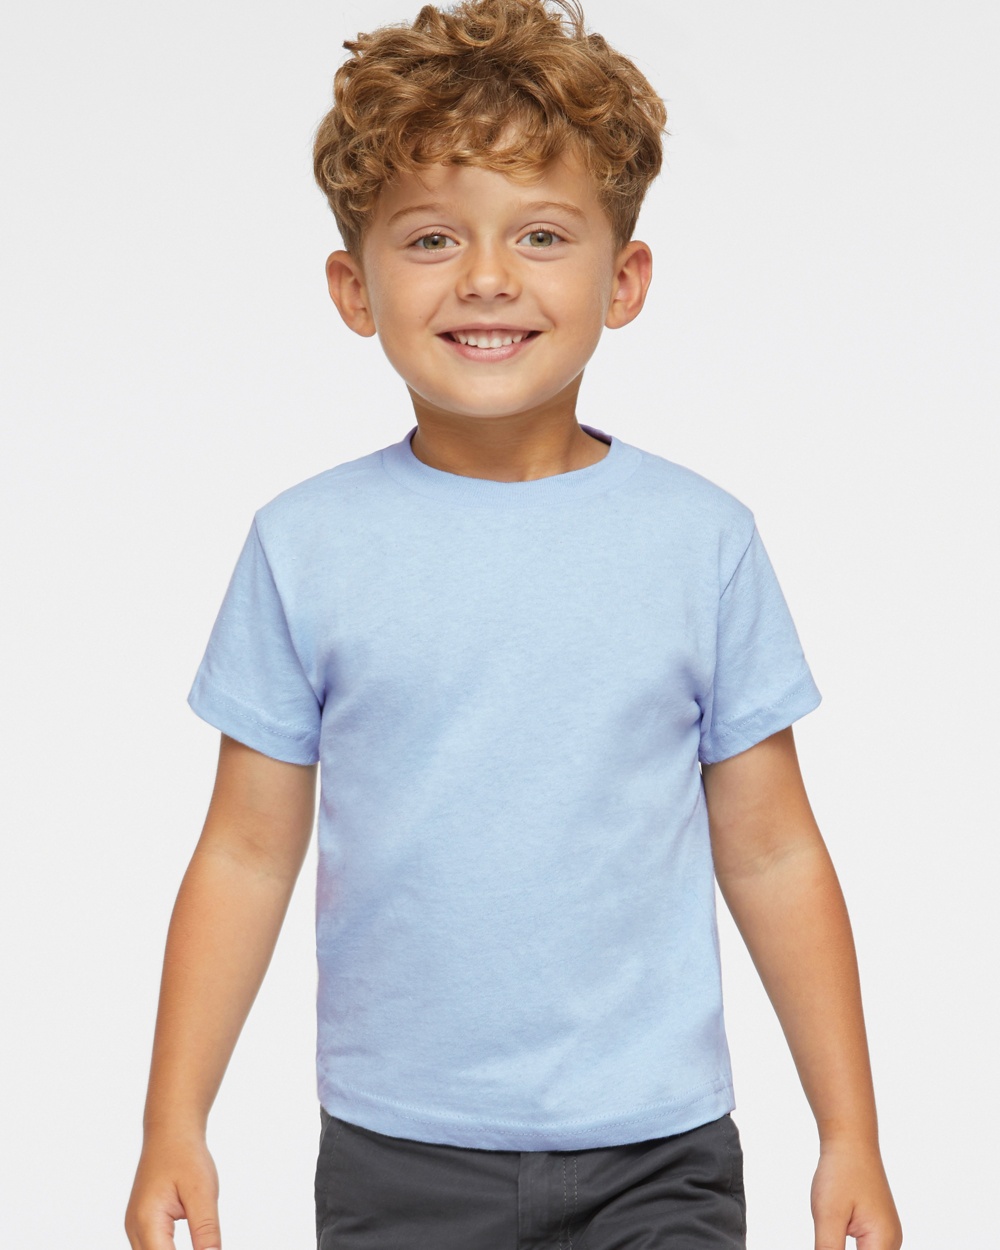 RS3301 - Toddler Cotton Jersey Tee - One Stop